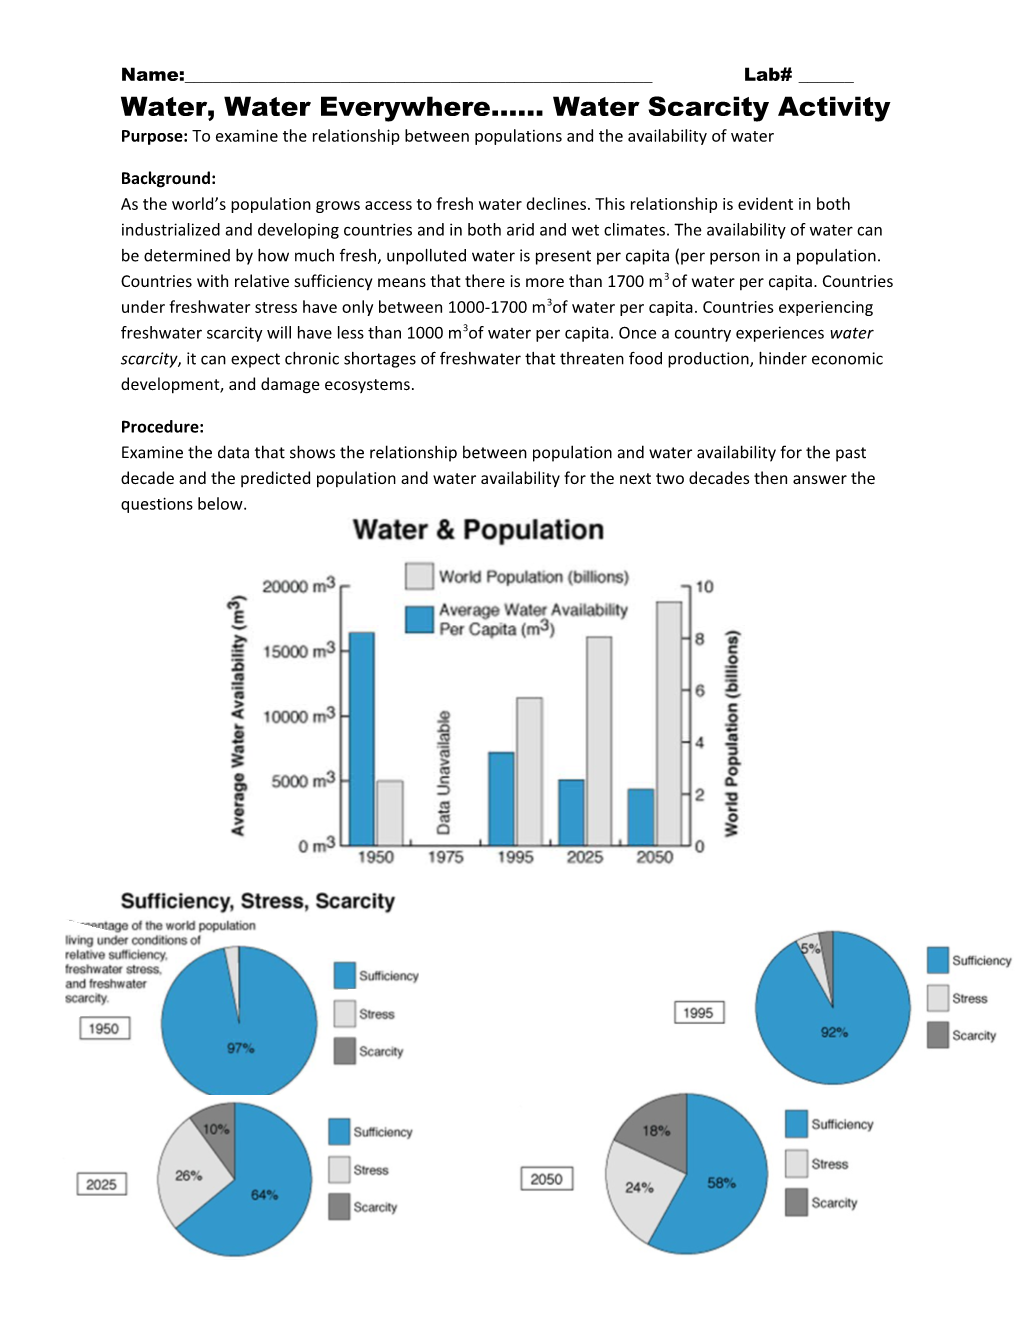 Purpose: to Examine the Relationship Between Populations and the Availability of Water